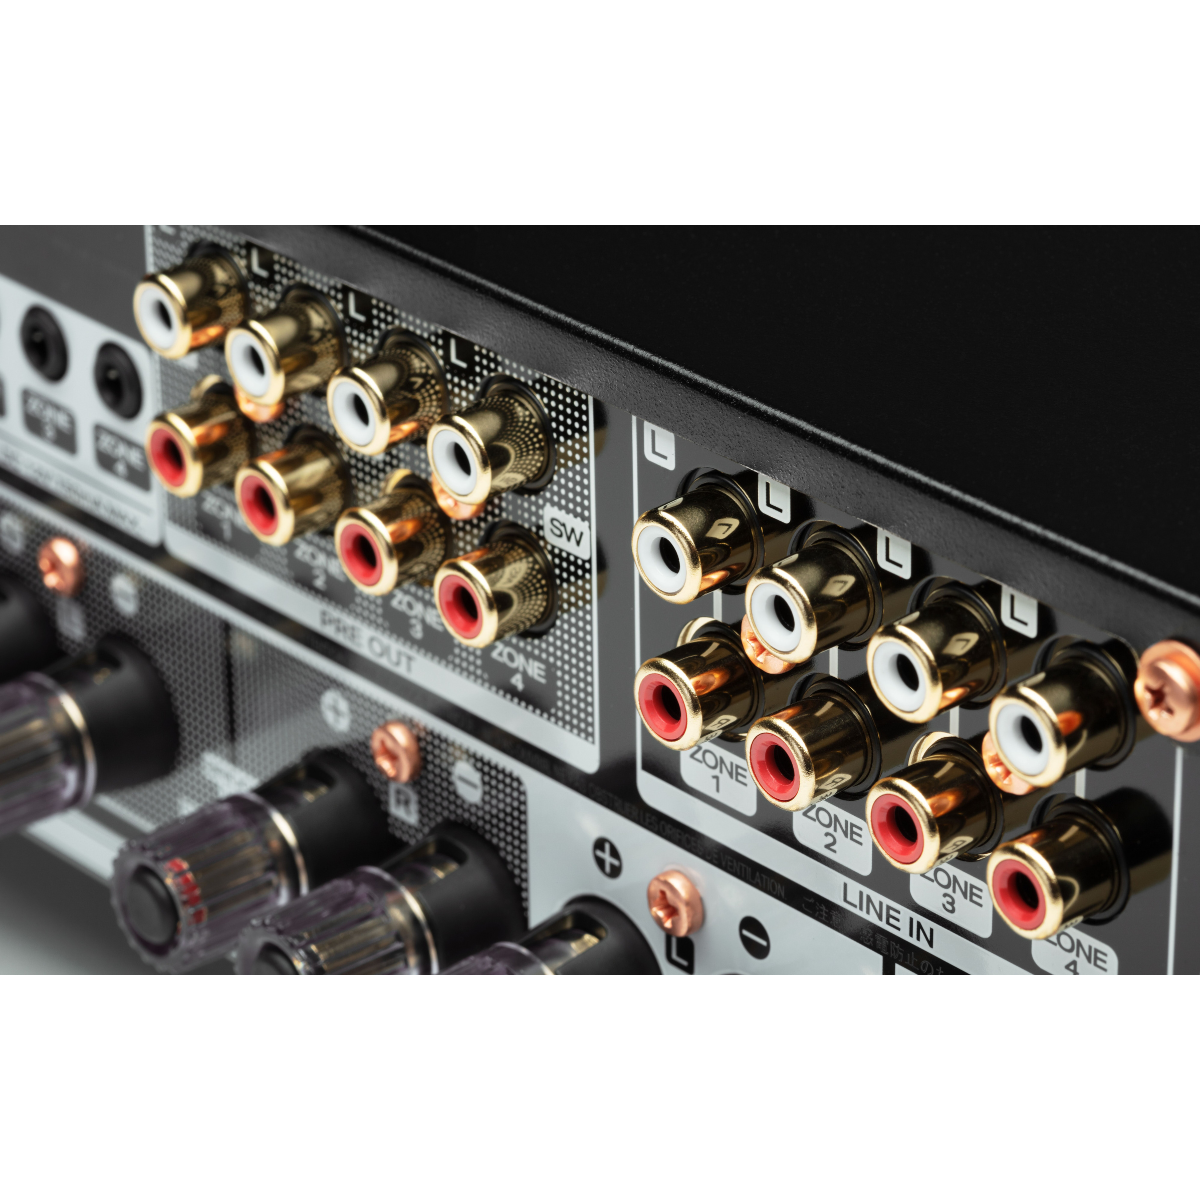 Marantz MODEL M4 8 x 100W per channel Four-Zone Distribution Amplifier with HEOS® Built-in